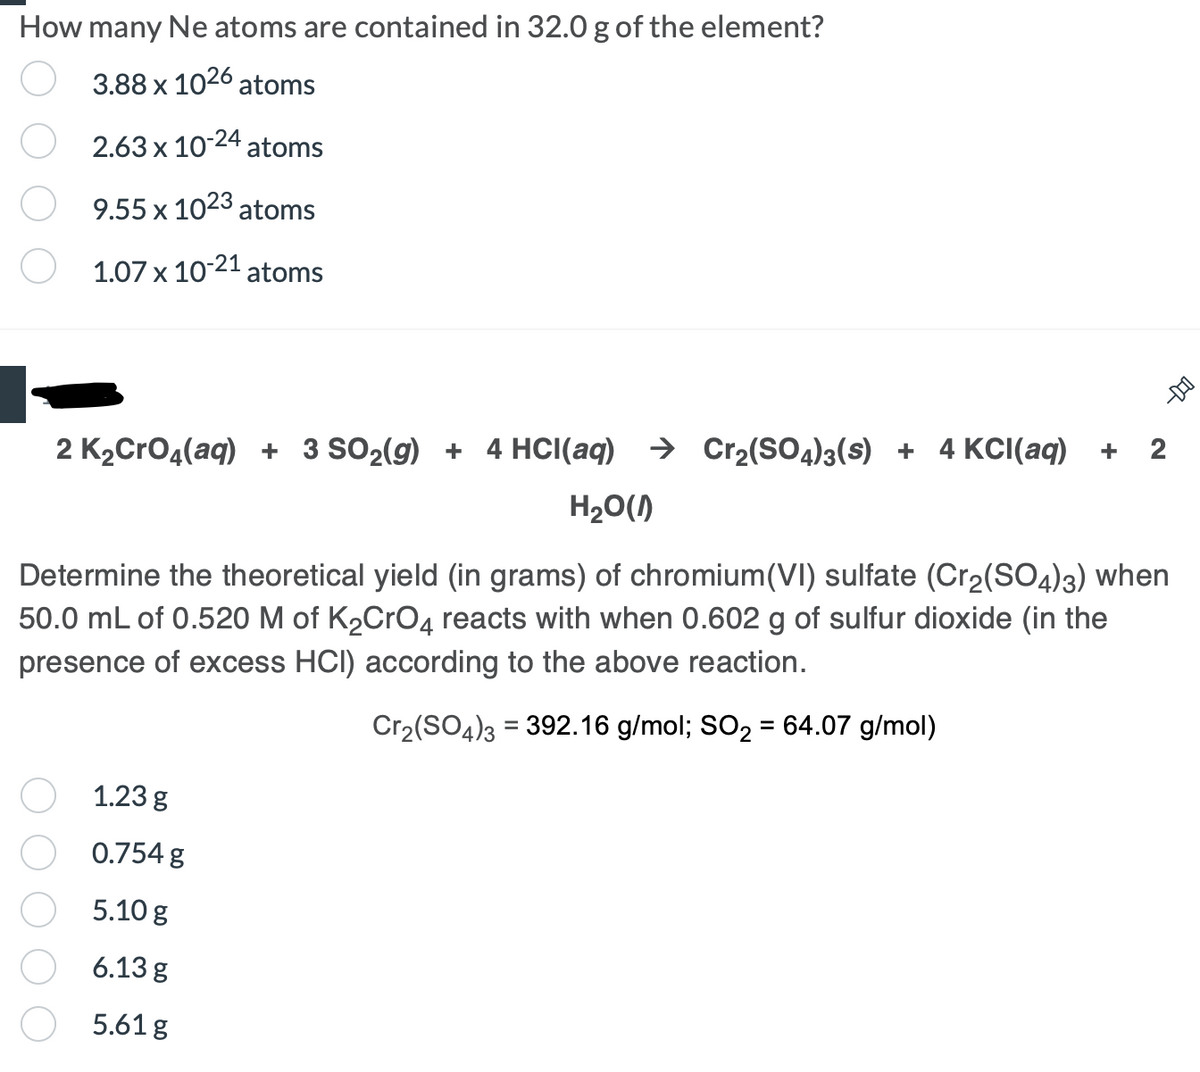 How many Ne atoms are contained in 32.0 g of the element?
3.88 x 1026 atoms
2.63 x 10-24 atoms
9.55 x 1023 atoms
1.07 x 10-21 atoms
--DO
2 K₂CrO4(aq) + 3 SO₂(g) + 4 HCl(aq) → Cr₂(SO4)3(s) + 4 KCl(aq) +
2
H₂O(1)
Determine the theoretical yield (in grams) of chromium(VI) sulfate (Cr₂(SO4)3) when
50.0 mL of 0.520 M of K₂CrO4 reacts with when 0.602 g of sulfur dioxide (in the
presence of excess HCI) according to the above reaction.
Cr₂(SO4)3 = 392.16 g/mol; SO₂ = 64.07 g/mol)
1.23 g
0.754 g
5.10 g
6.13 g
5.61 g